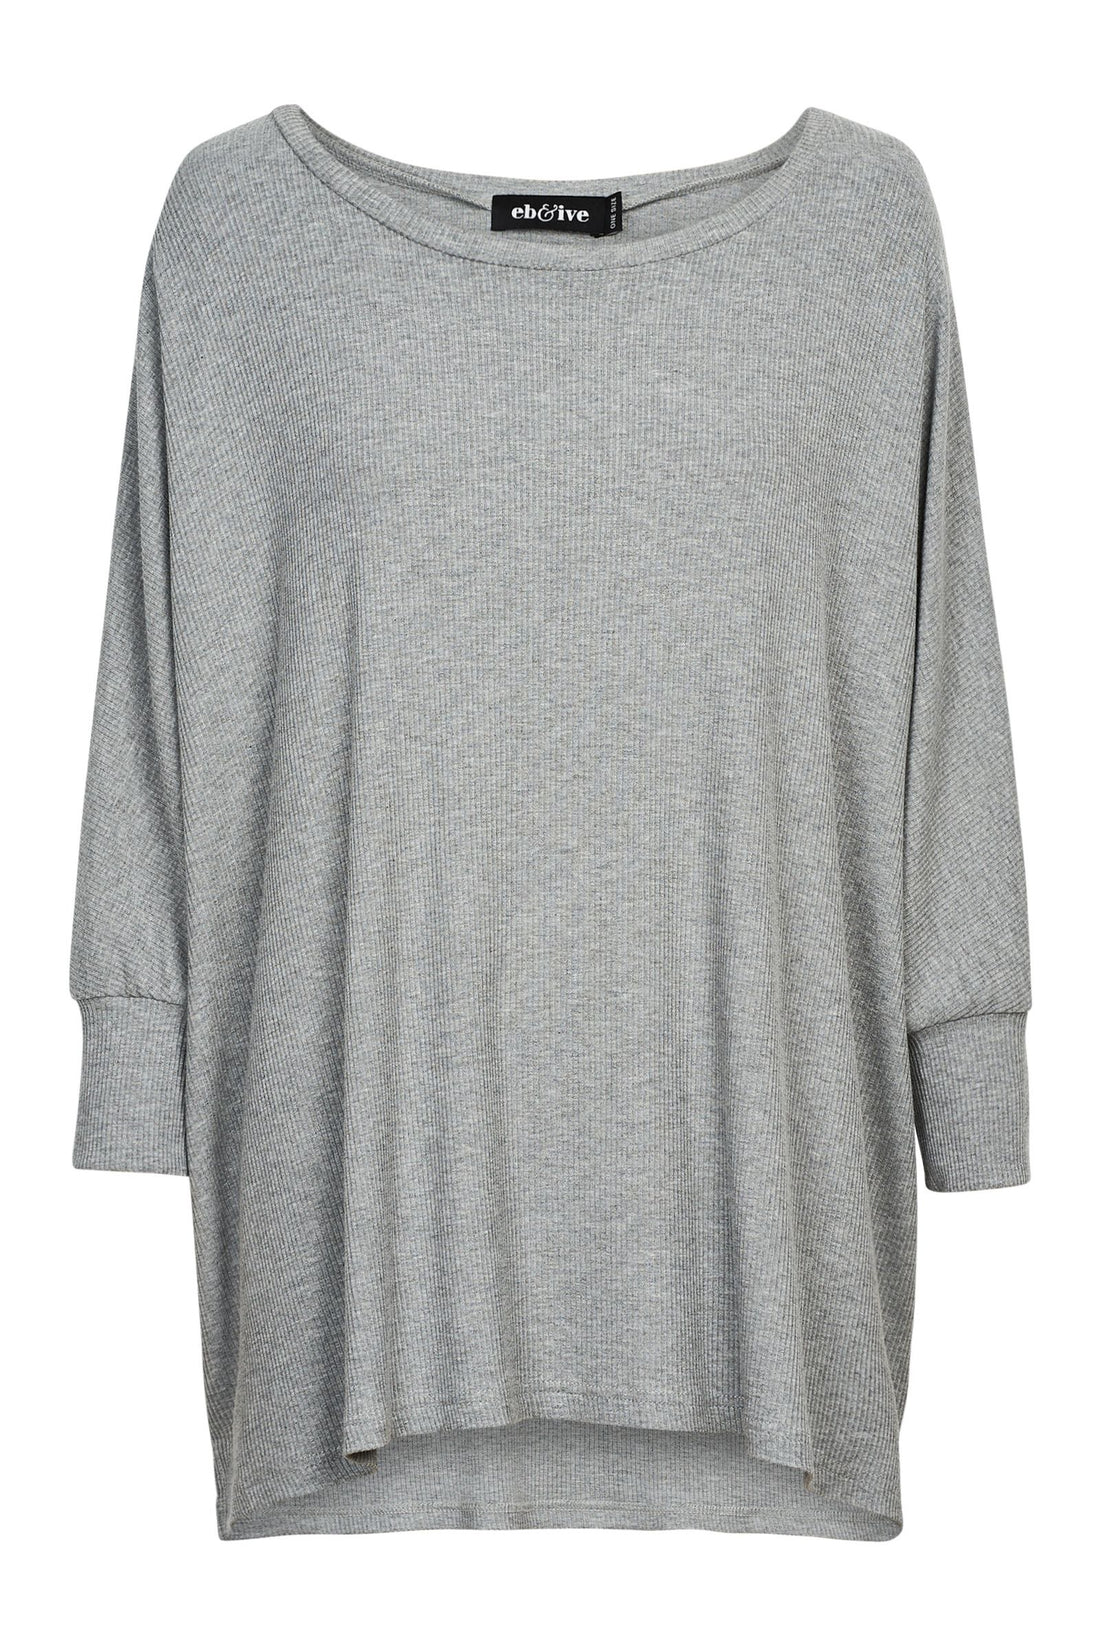 Eb &amp; Ive Grey Ribbed Top - One Size